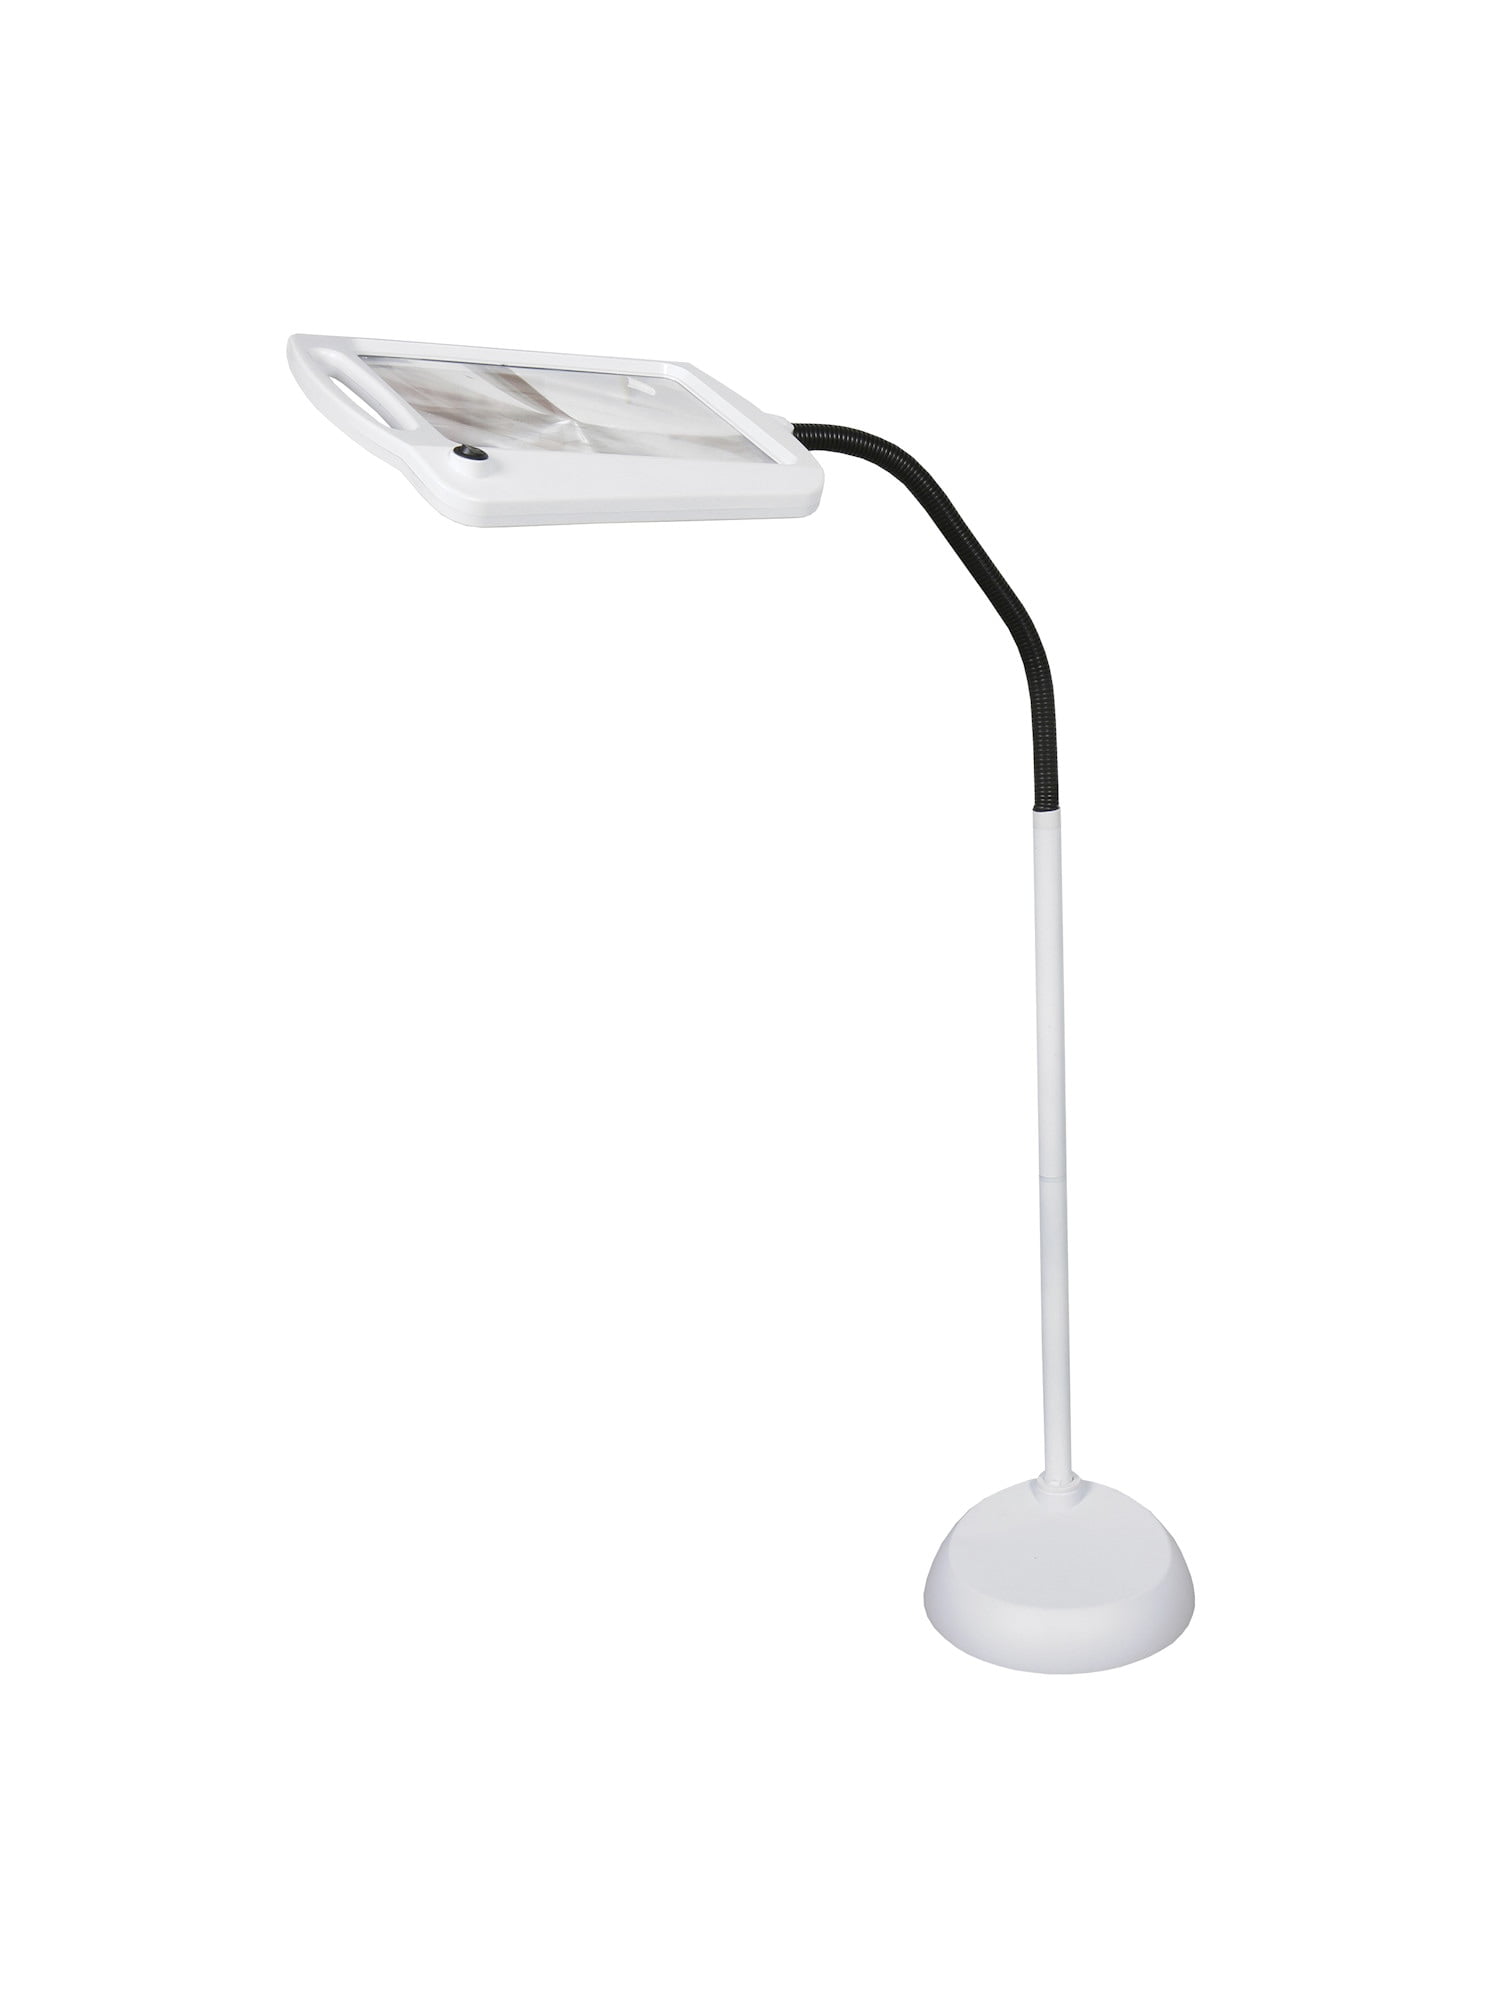 daylight24 402039-55 Full Page 8 x 10 inch Magnifier LED Illuminated Floor Lamp, Gold